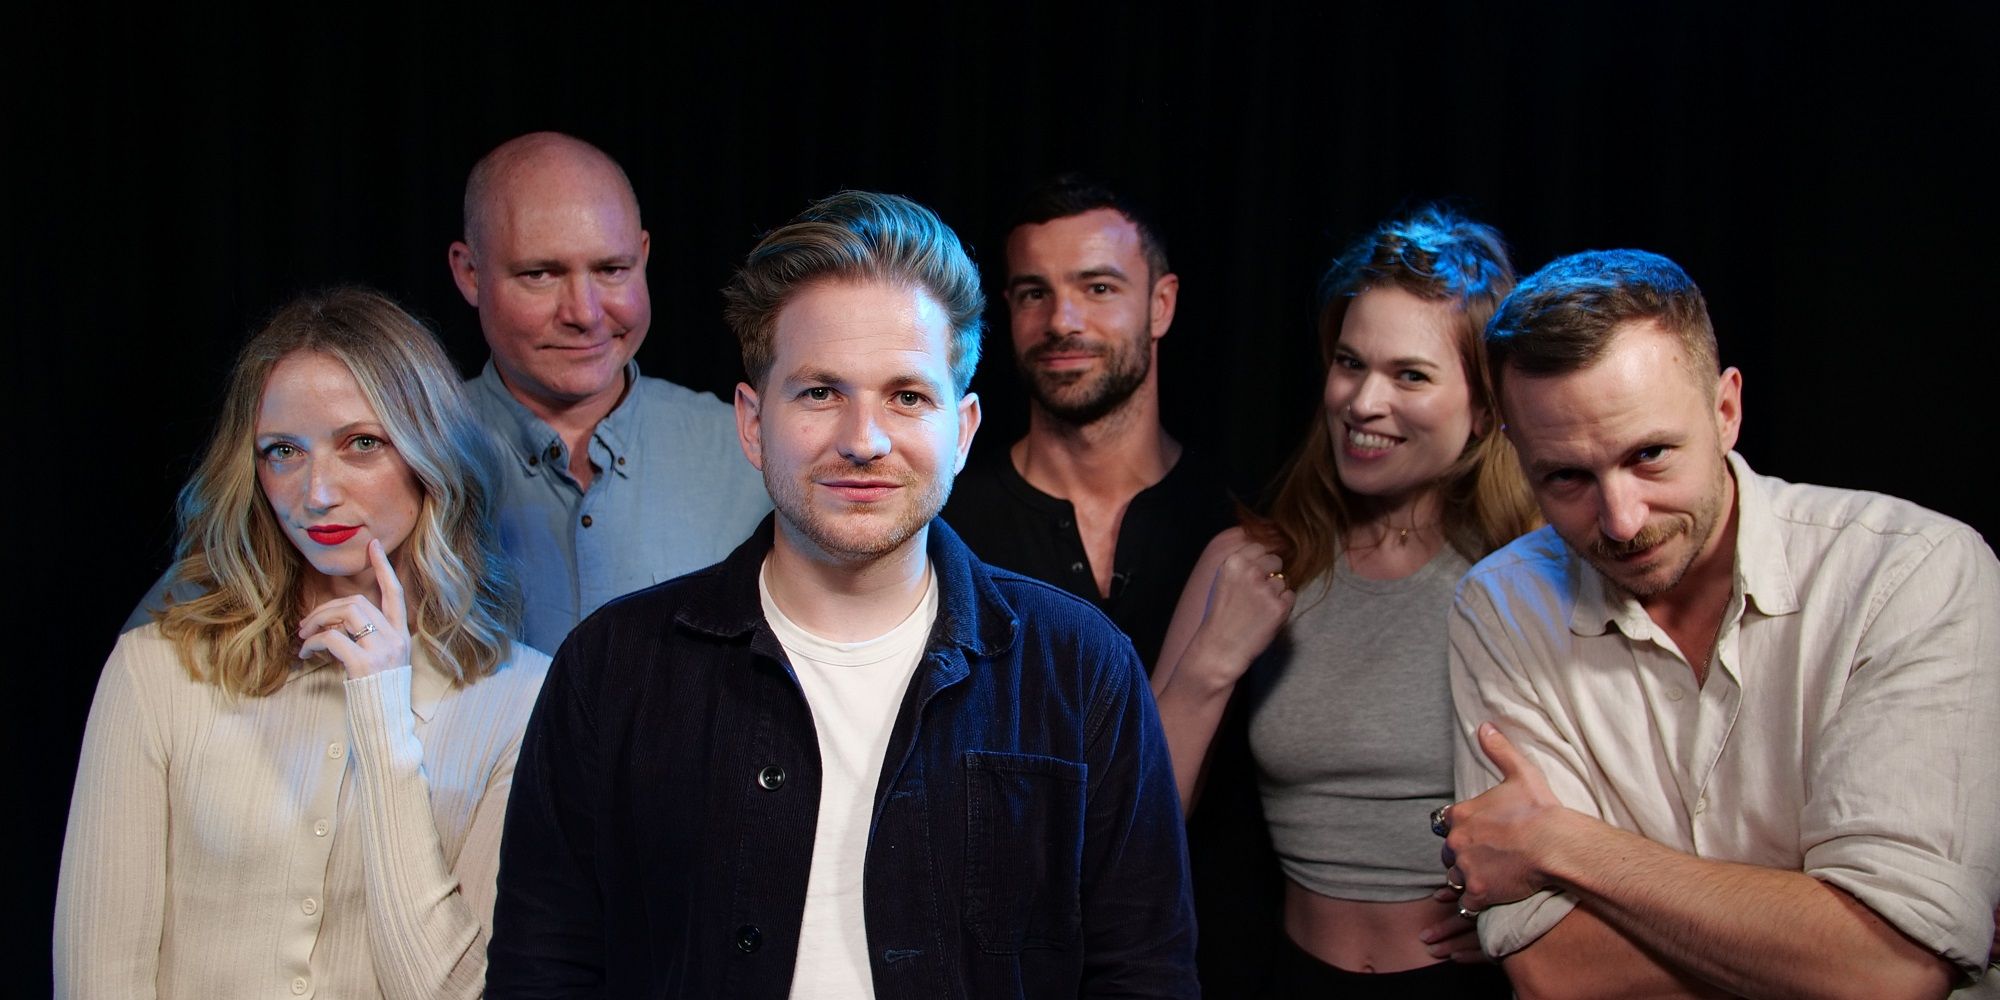 A group photo of the Natural Six cast.